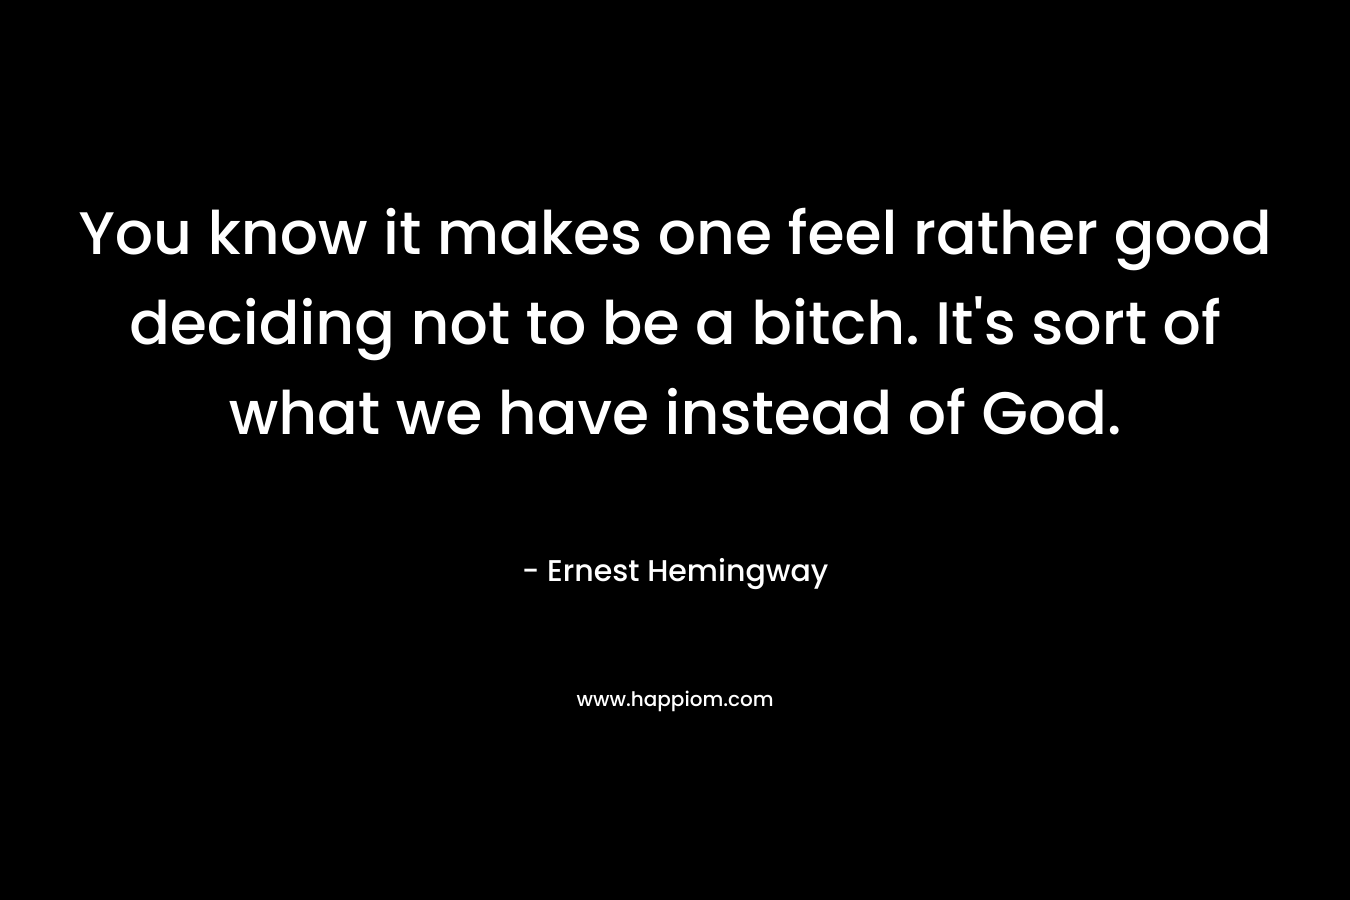 You know it makes one feel rather good deciding not to be a bitch. It’s sort of what we have instead of God. – Ernest Hemingway